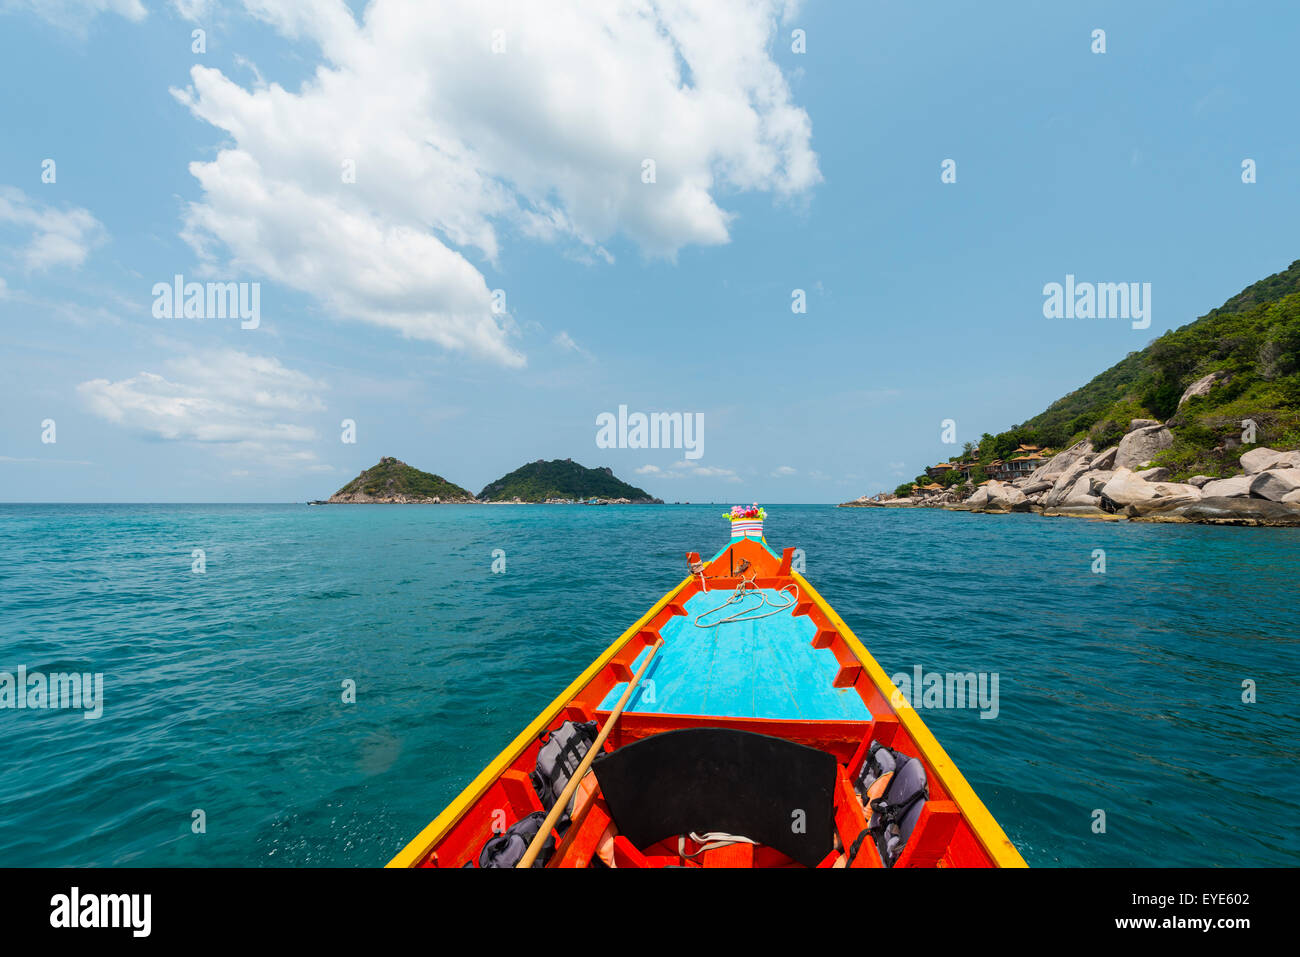 Bow of a moving longtail boat in the turquoise sea, island of Koh Tao, Gulf of Thailand, Thailand Stock Photo